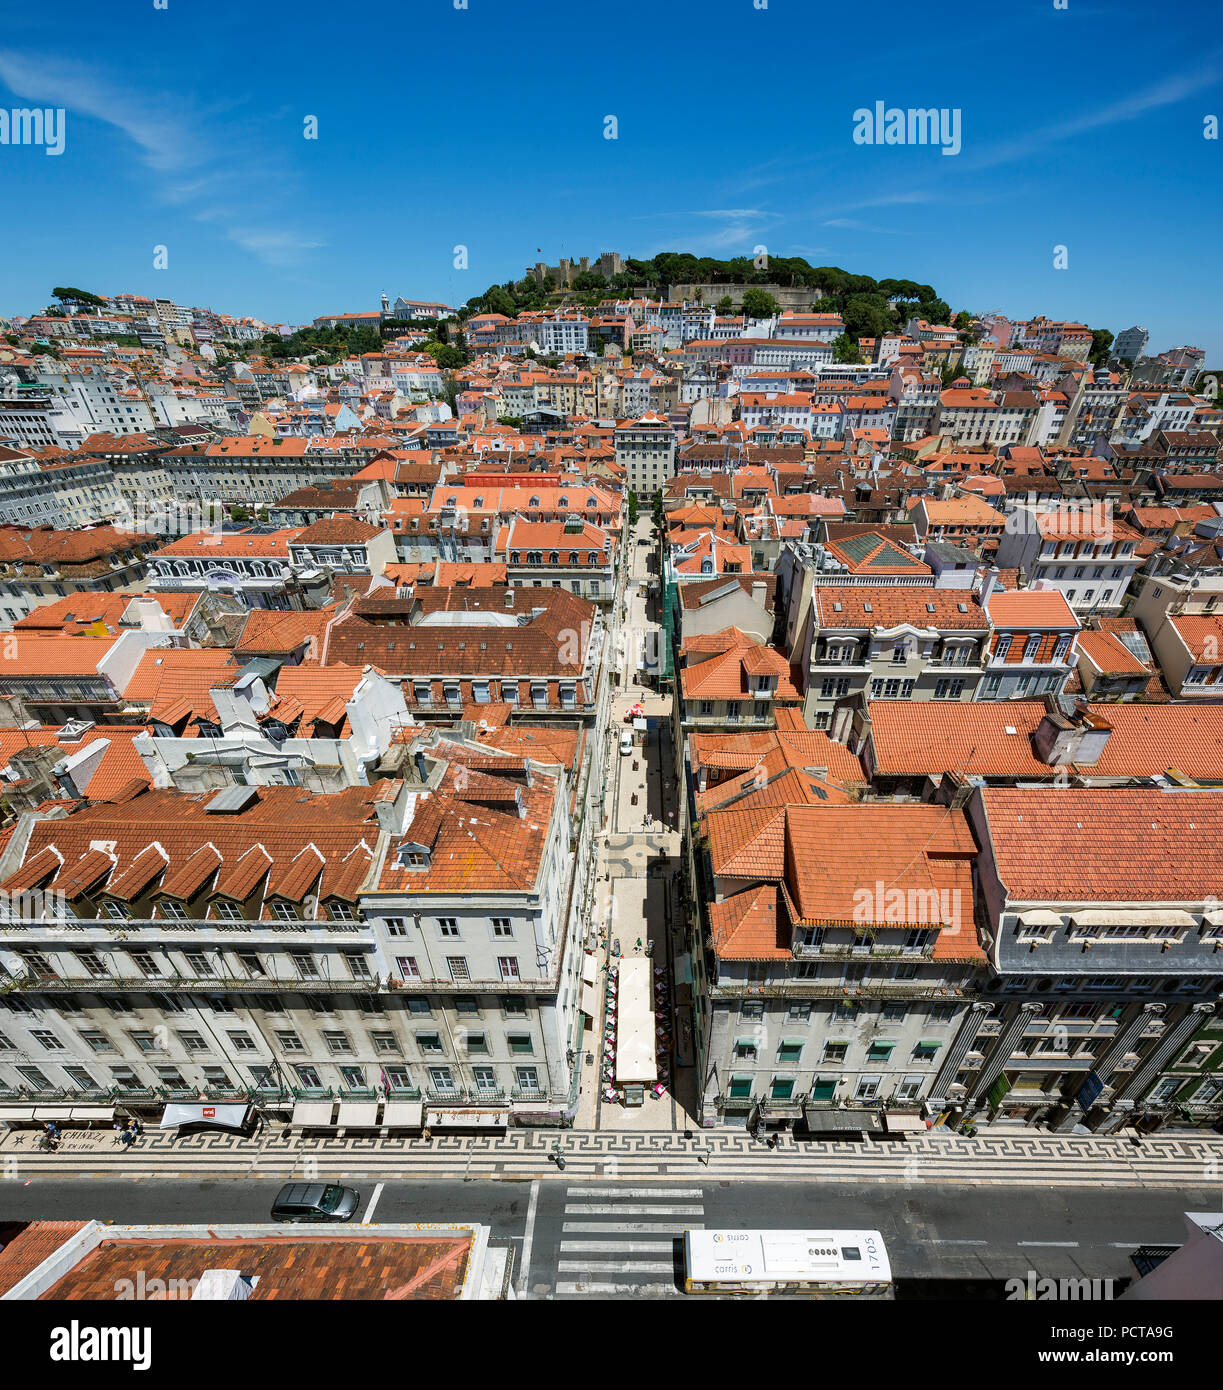 View from the most famous elevator of Portugal Elevador do Município or Elevador da Biblioteca and Elevador de S. Julião to the old town of Portugal with the red roofs, Lisbon, District of Lisbon, Portugal, Europe Stock Photo